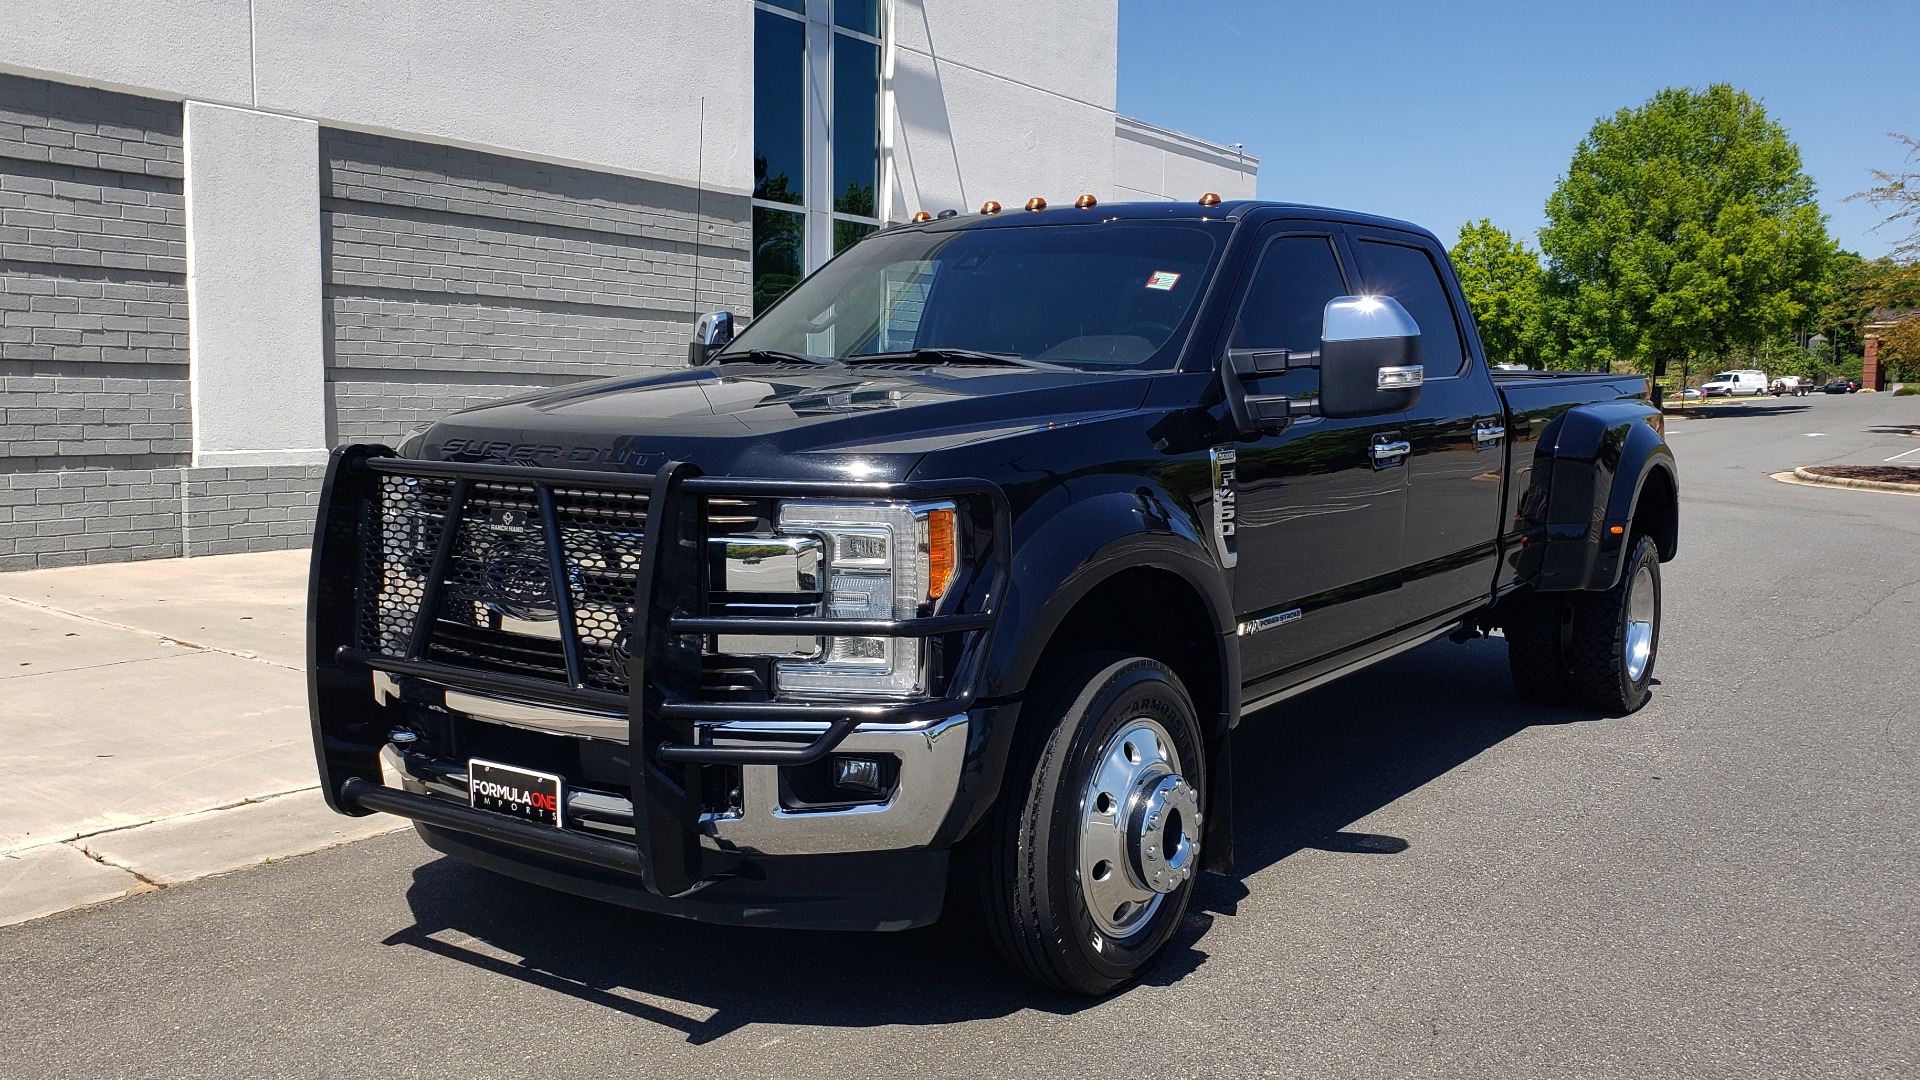 Used 2017 Ford SUPER DUTY F-450 DRW KING RANCH 4X4 / 176IN WB / 6.7L POWER-STROKE / LOADED for sale Sold at Formula Imports in Charlotte NC 28227 2